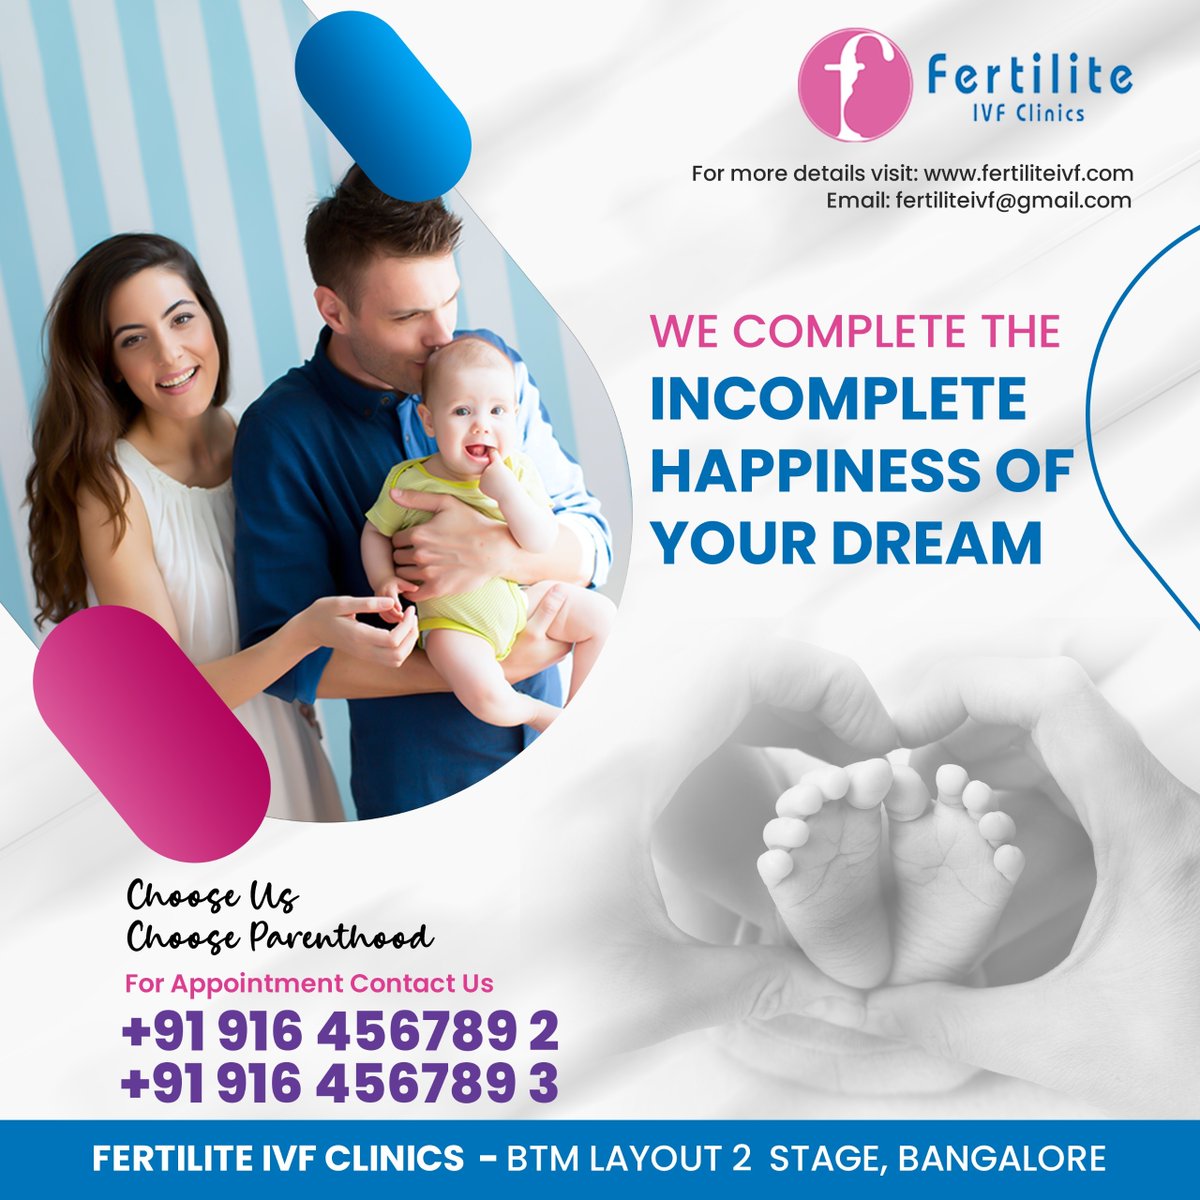 🌟 Struggling to complete your happiness? Look no further! 🌟

🔗 Visit our website fertiliteivf.com for more information and to take the first step towards fulfilling your dreams.

📞 For appointments, contact us at +91 916 4567892 or +91 916 4567893.